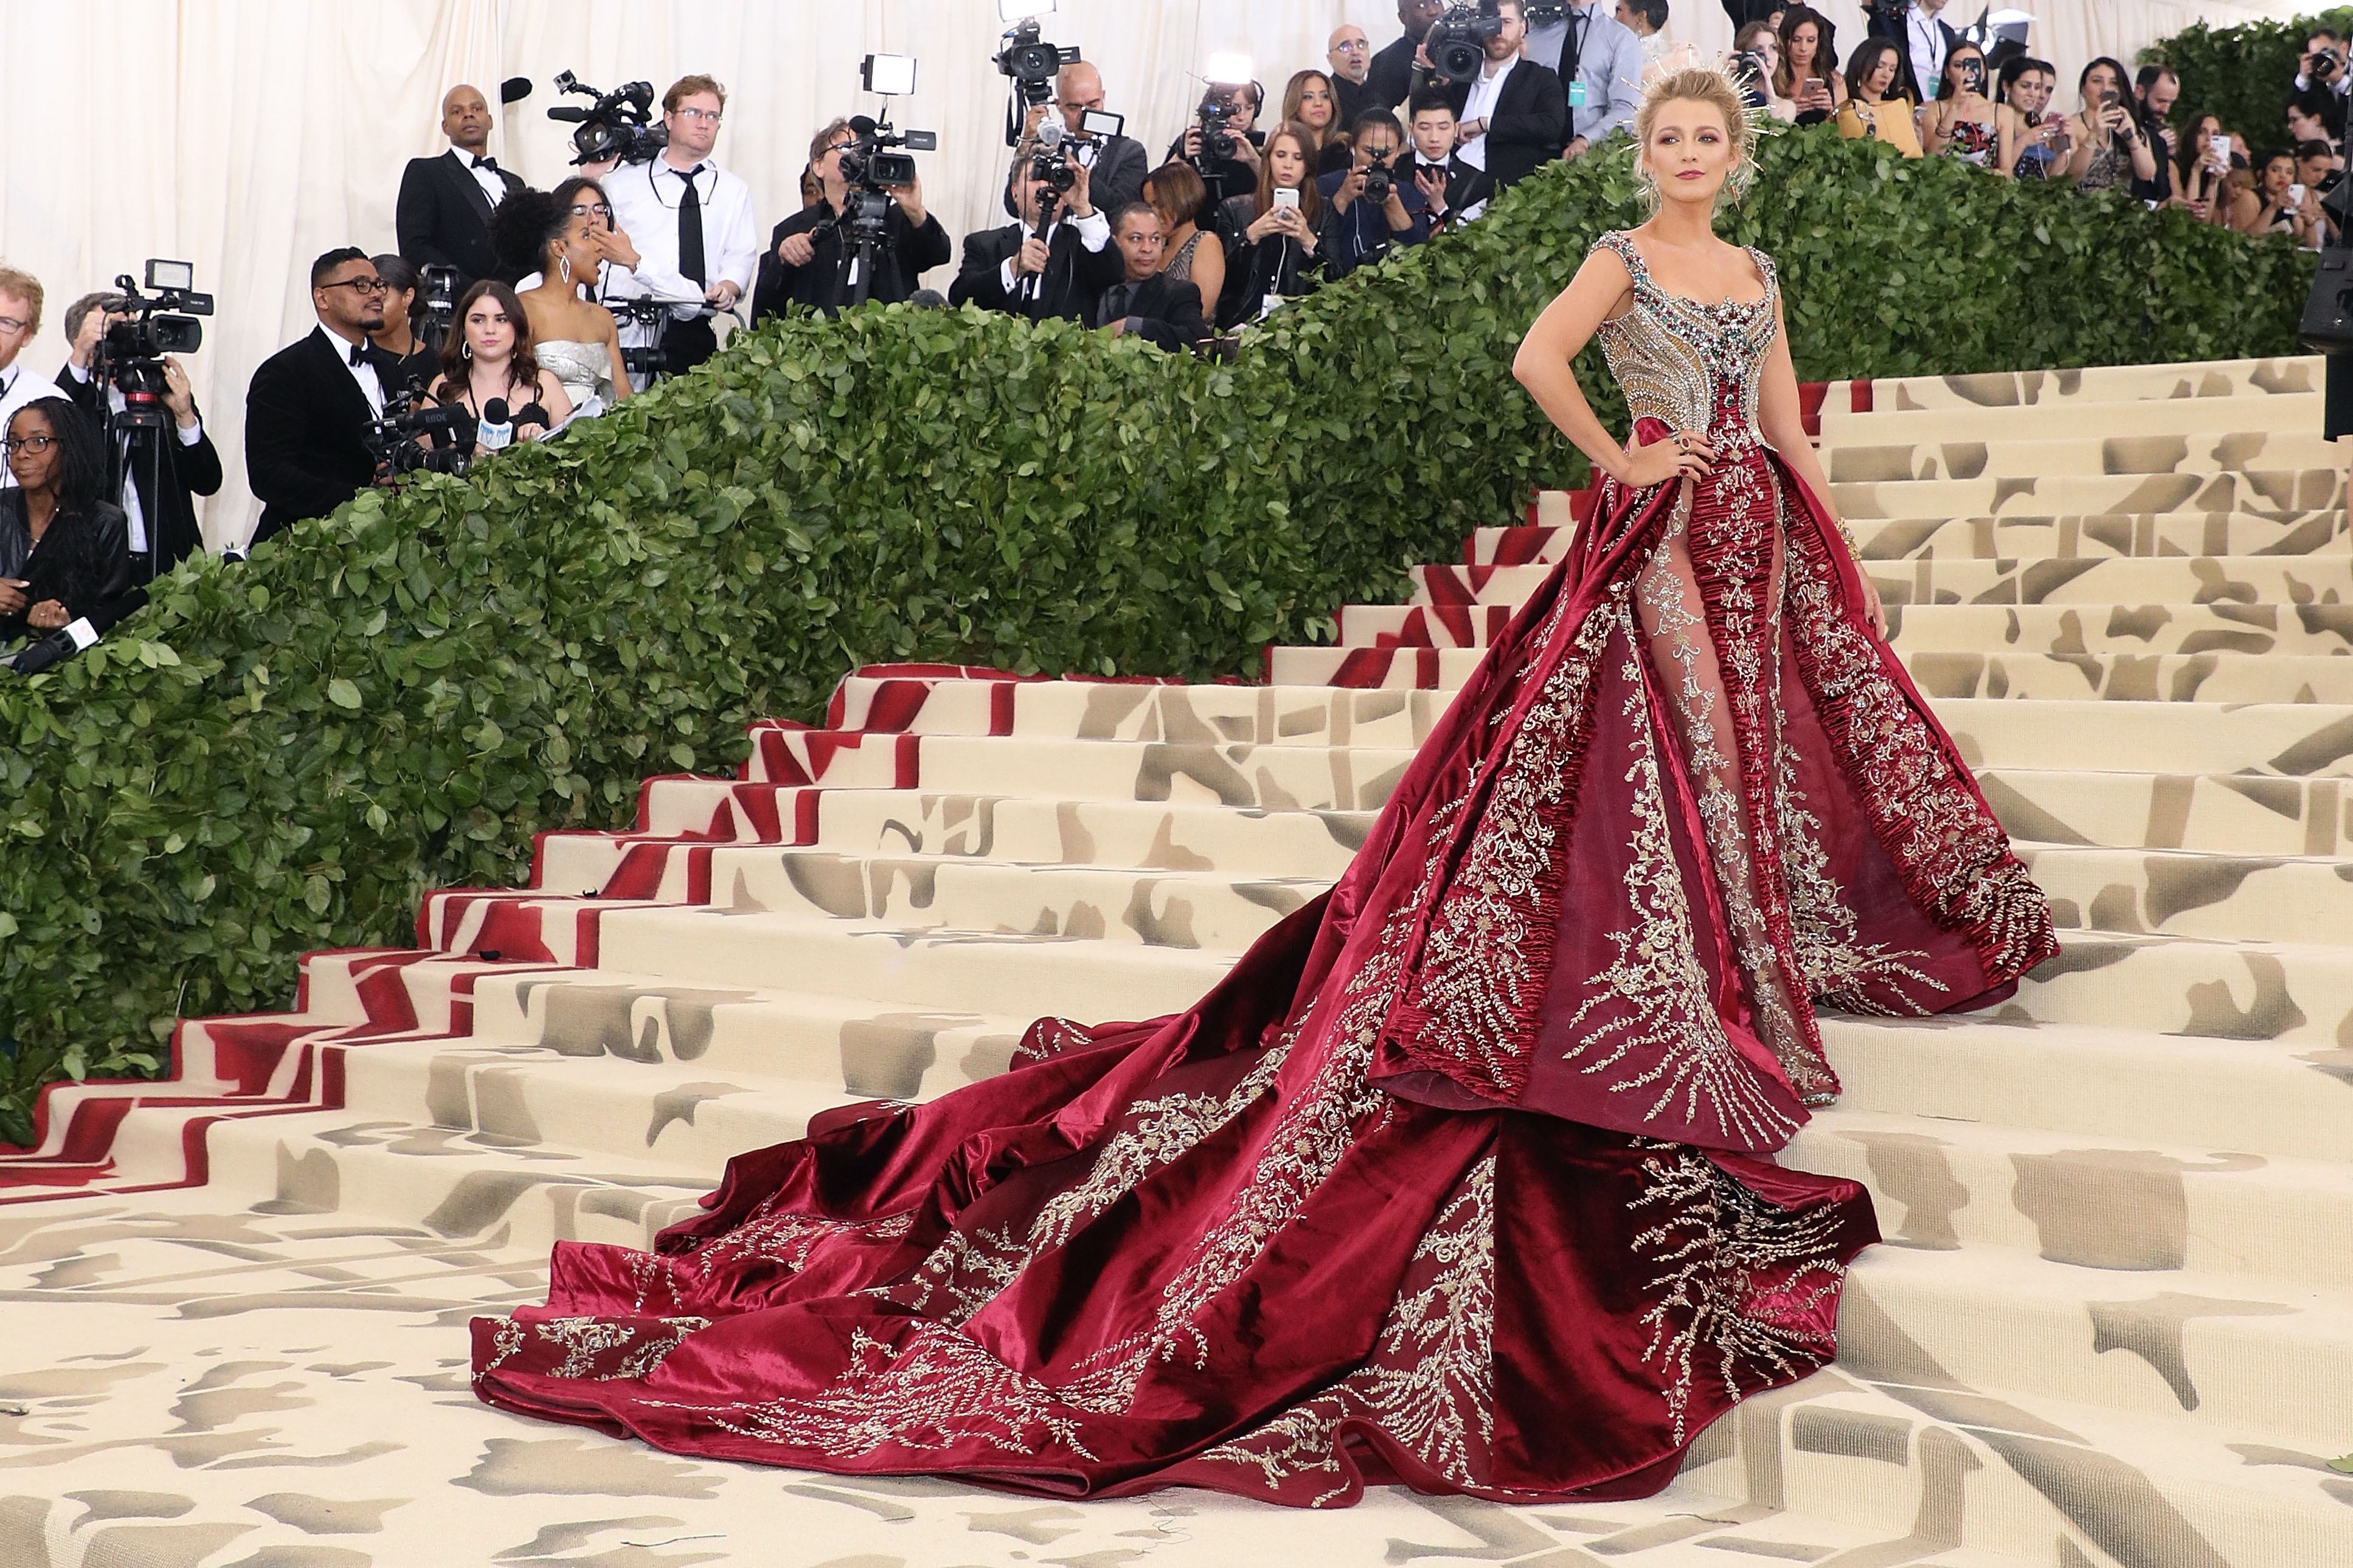 Blake Lively Wore $2 Million Jewelry To The 2018 Met Gala | Money